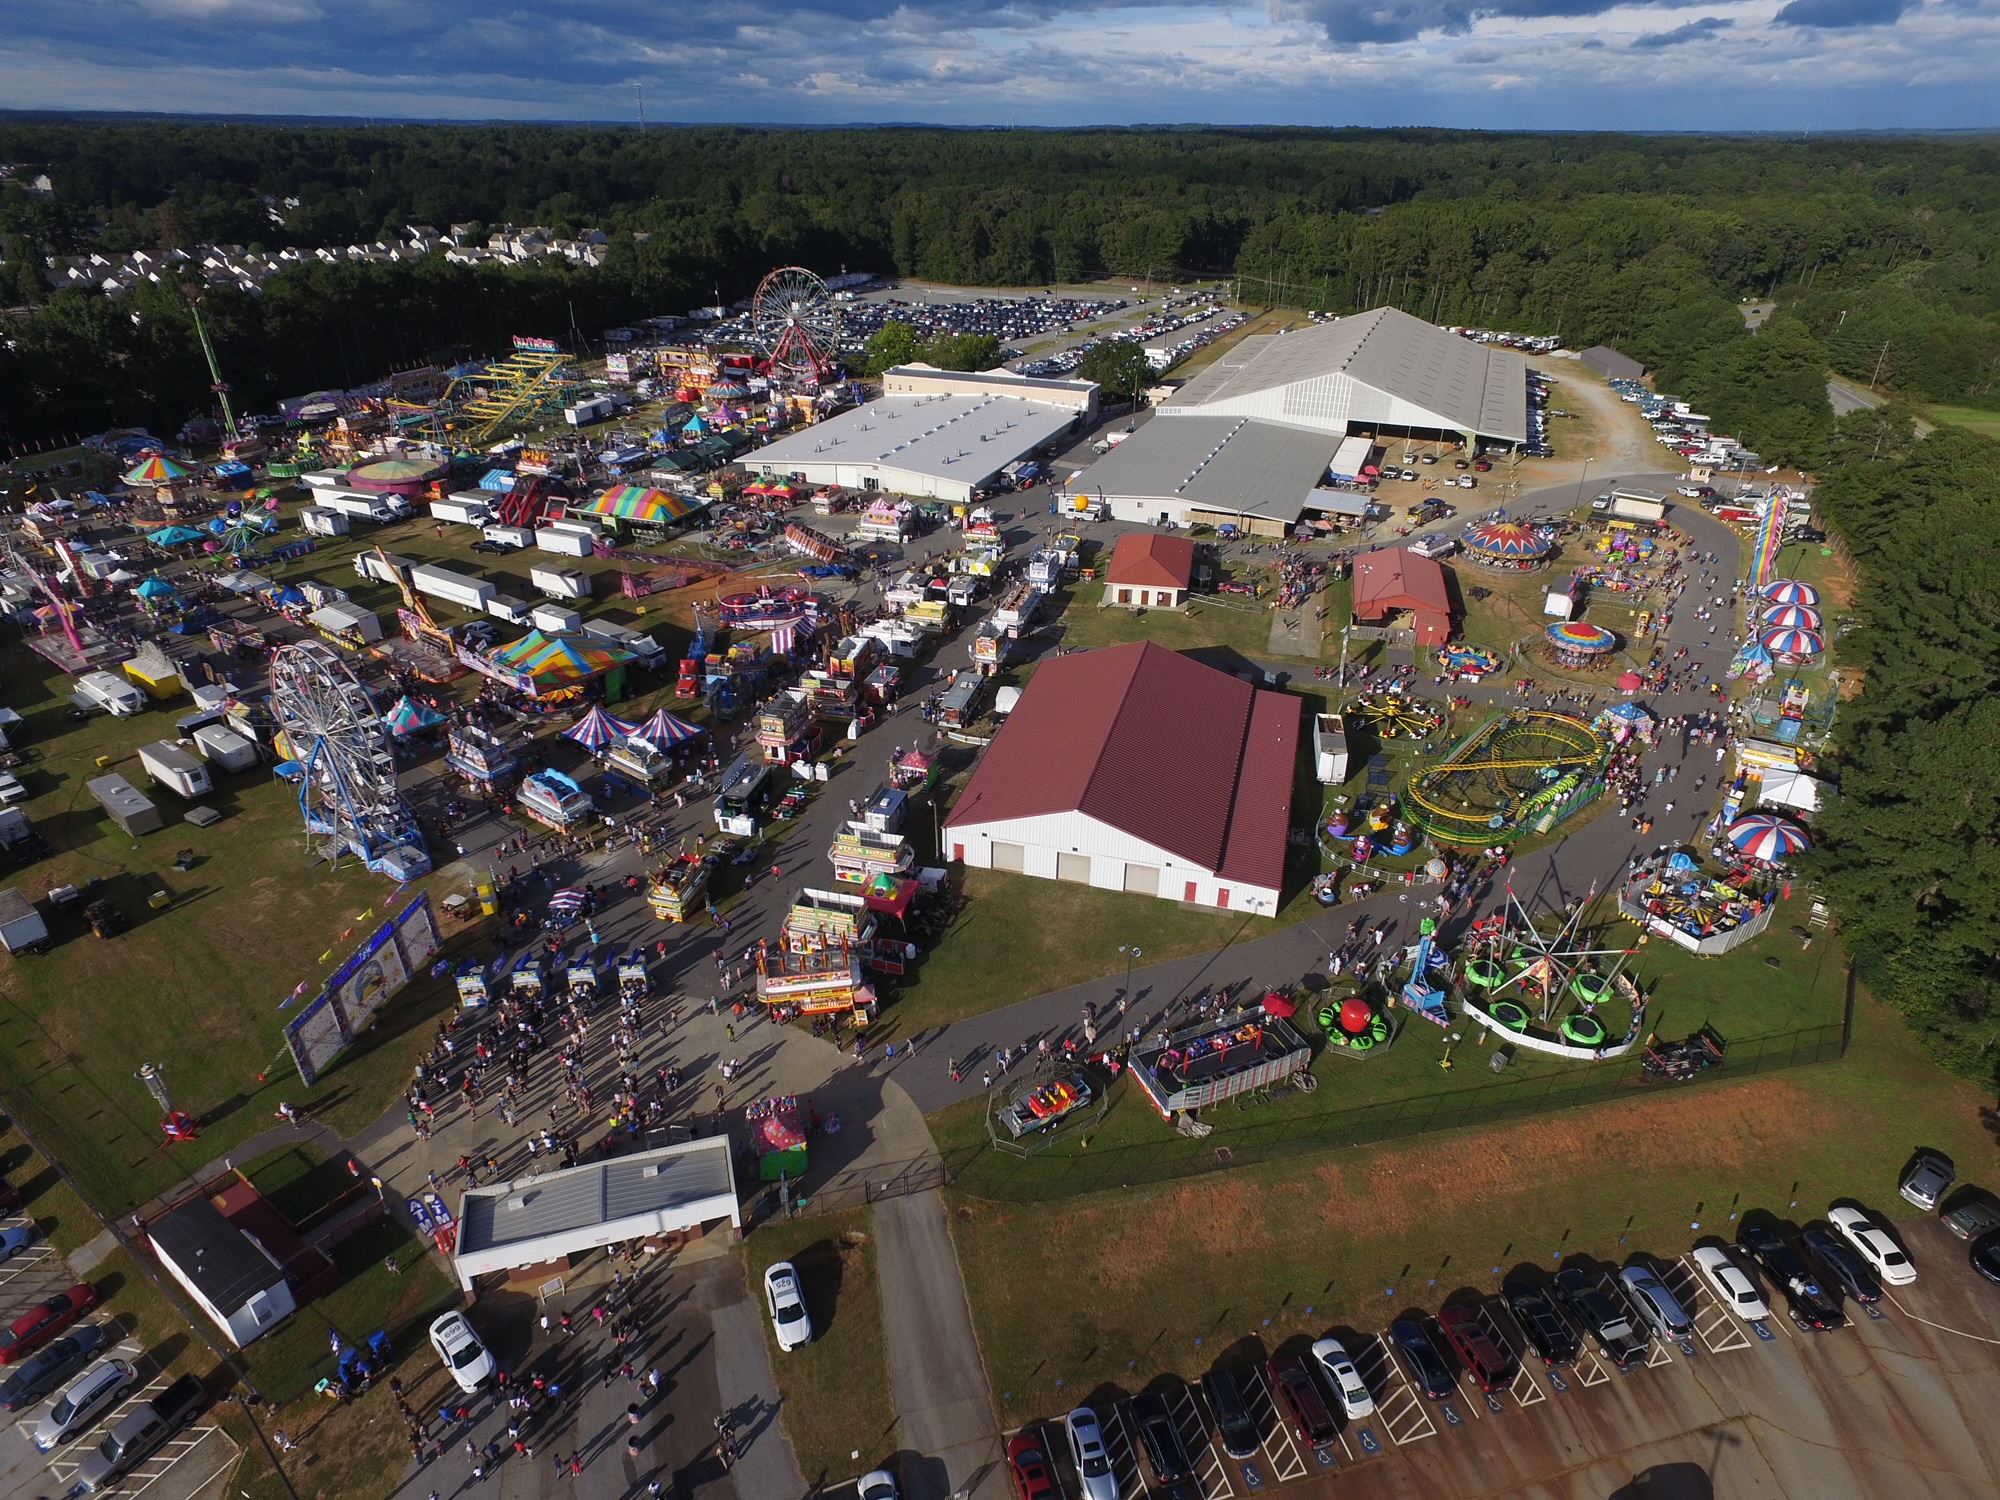 Drone shot of fair from 500 feet up